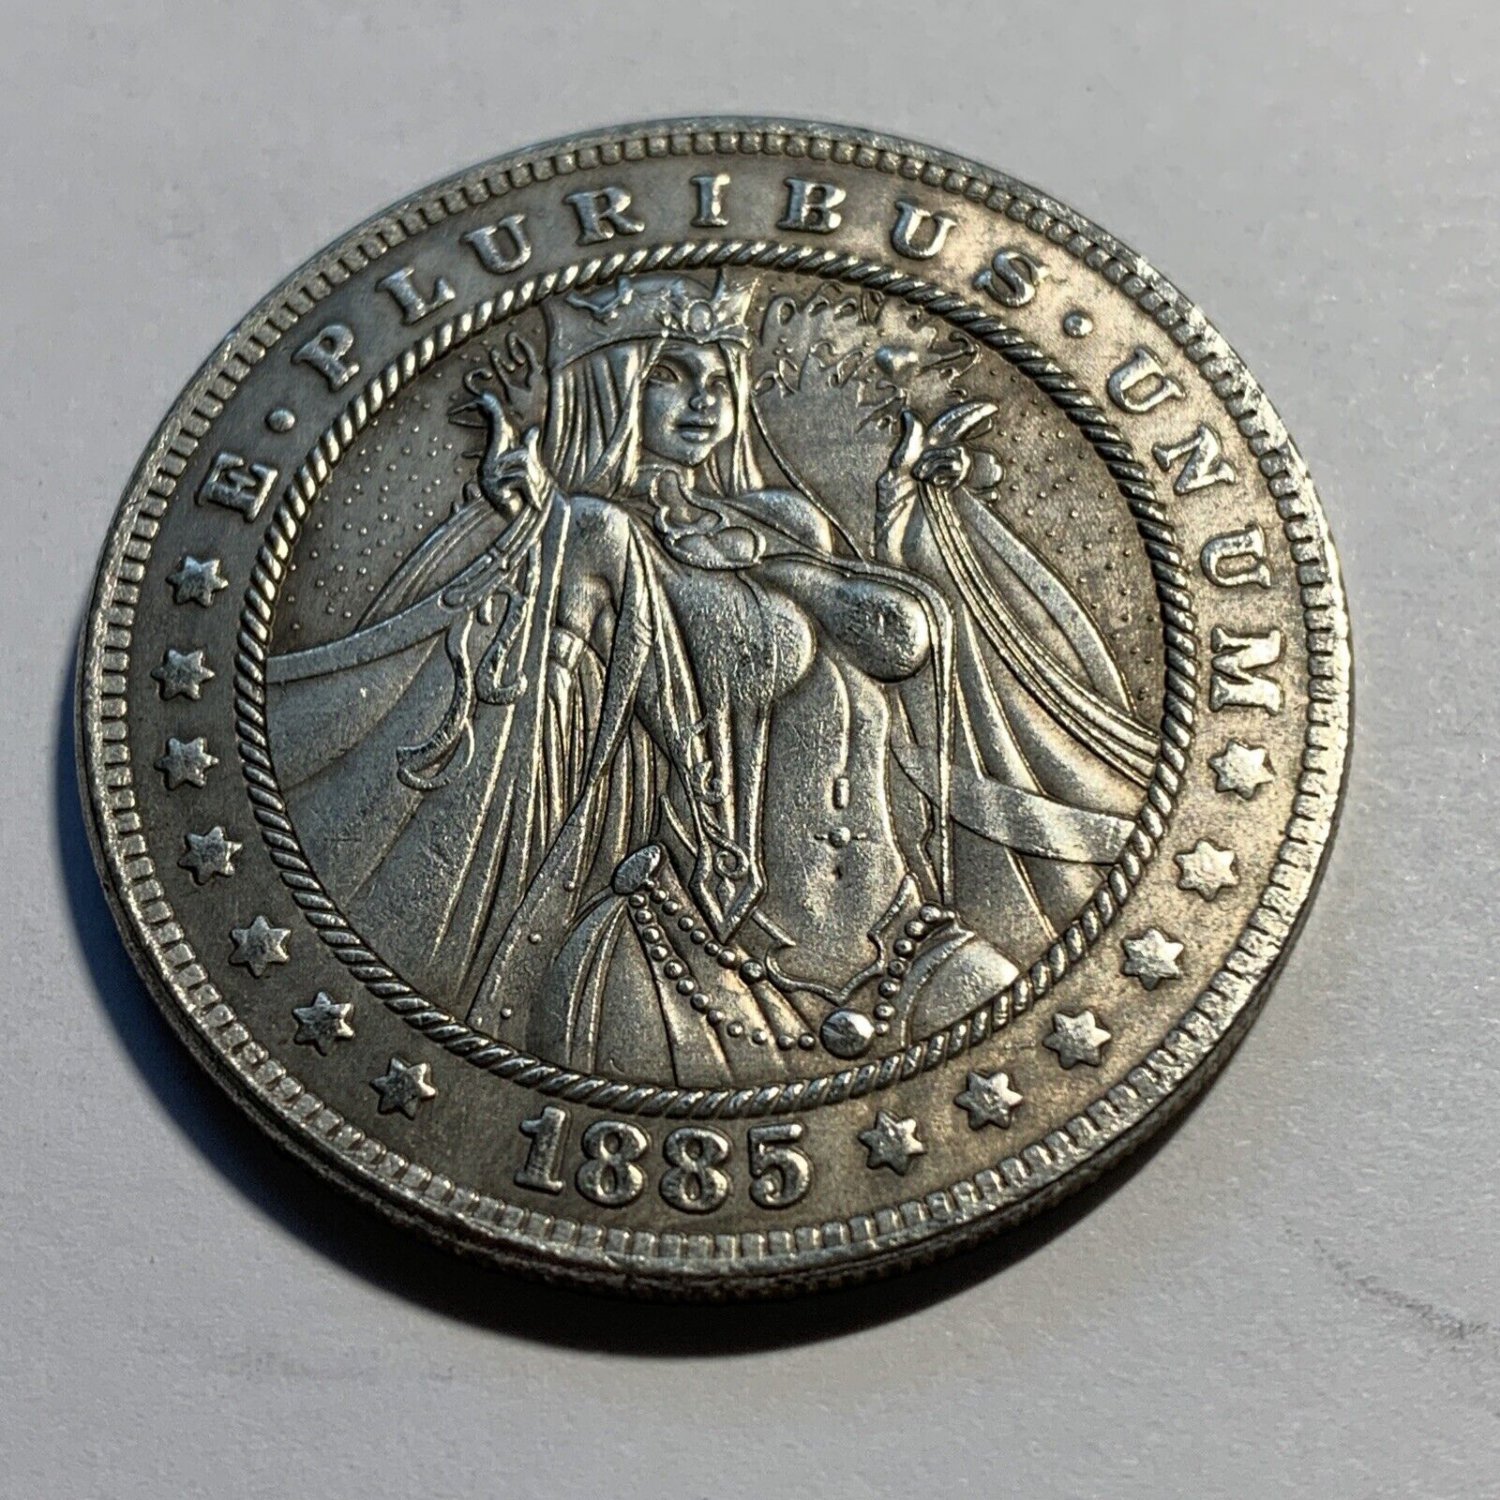 Sexy Queen Has Arrived Novelty Good Luck Heads Tails Challenge Coin 1445